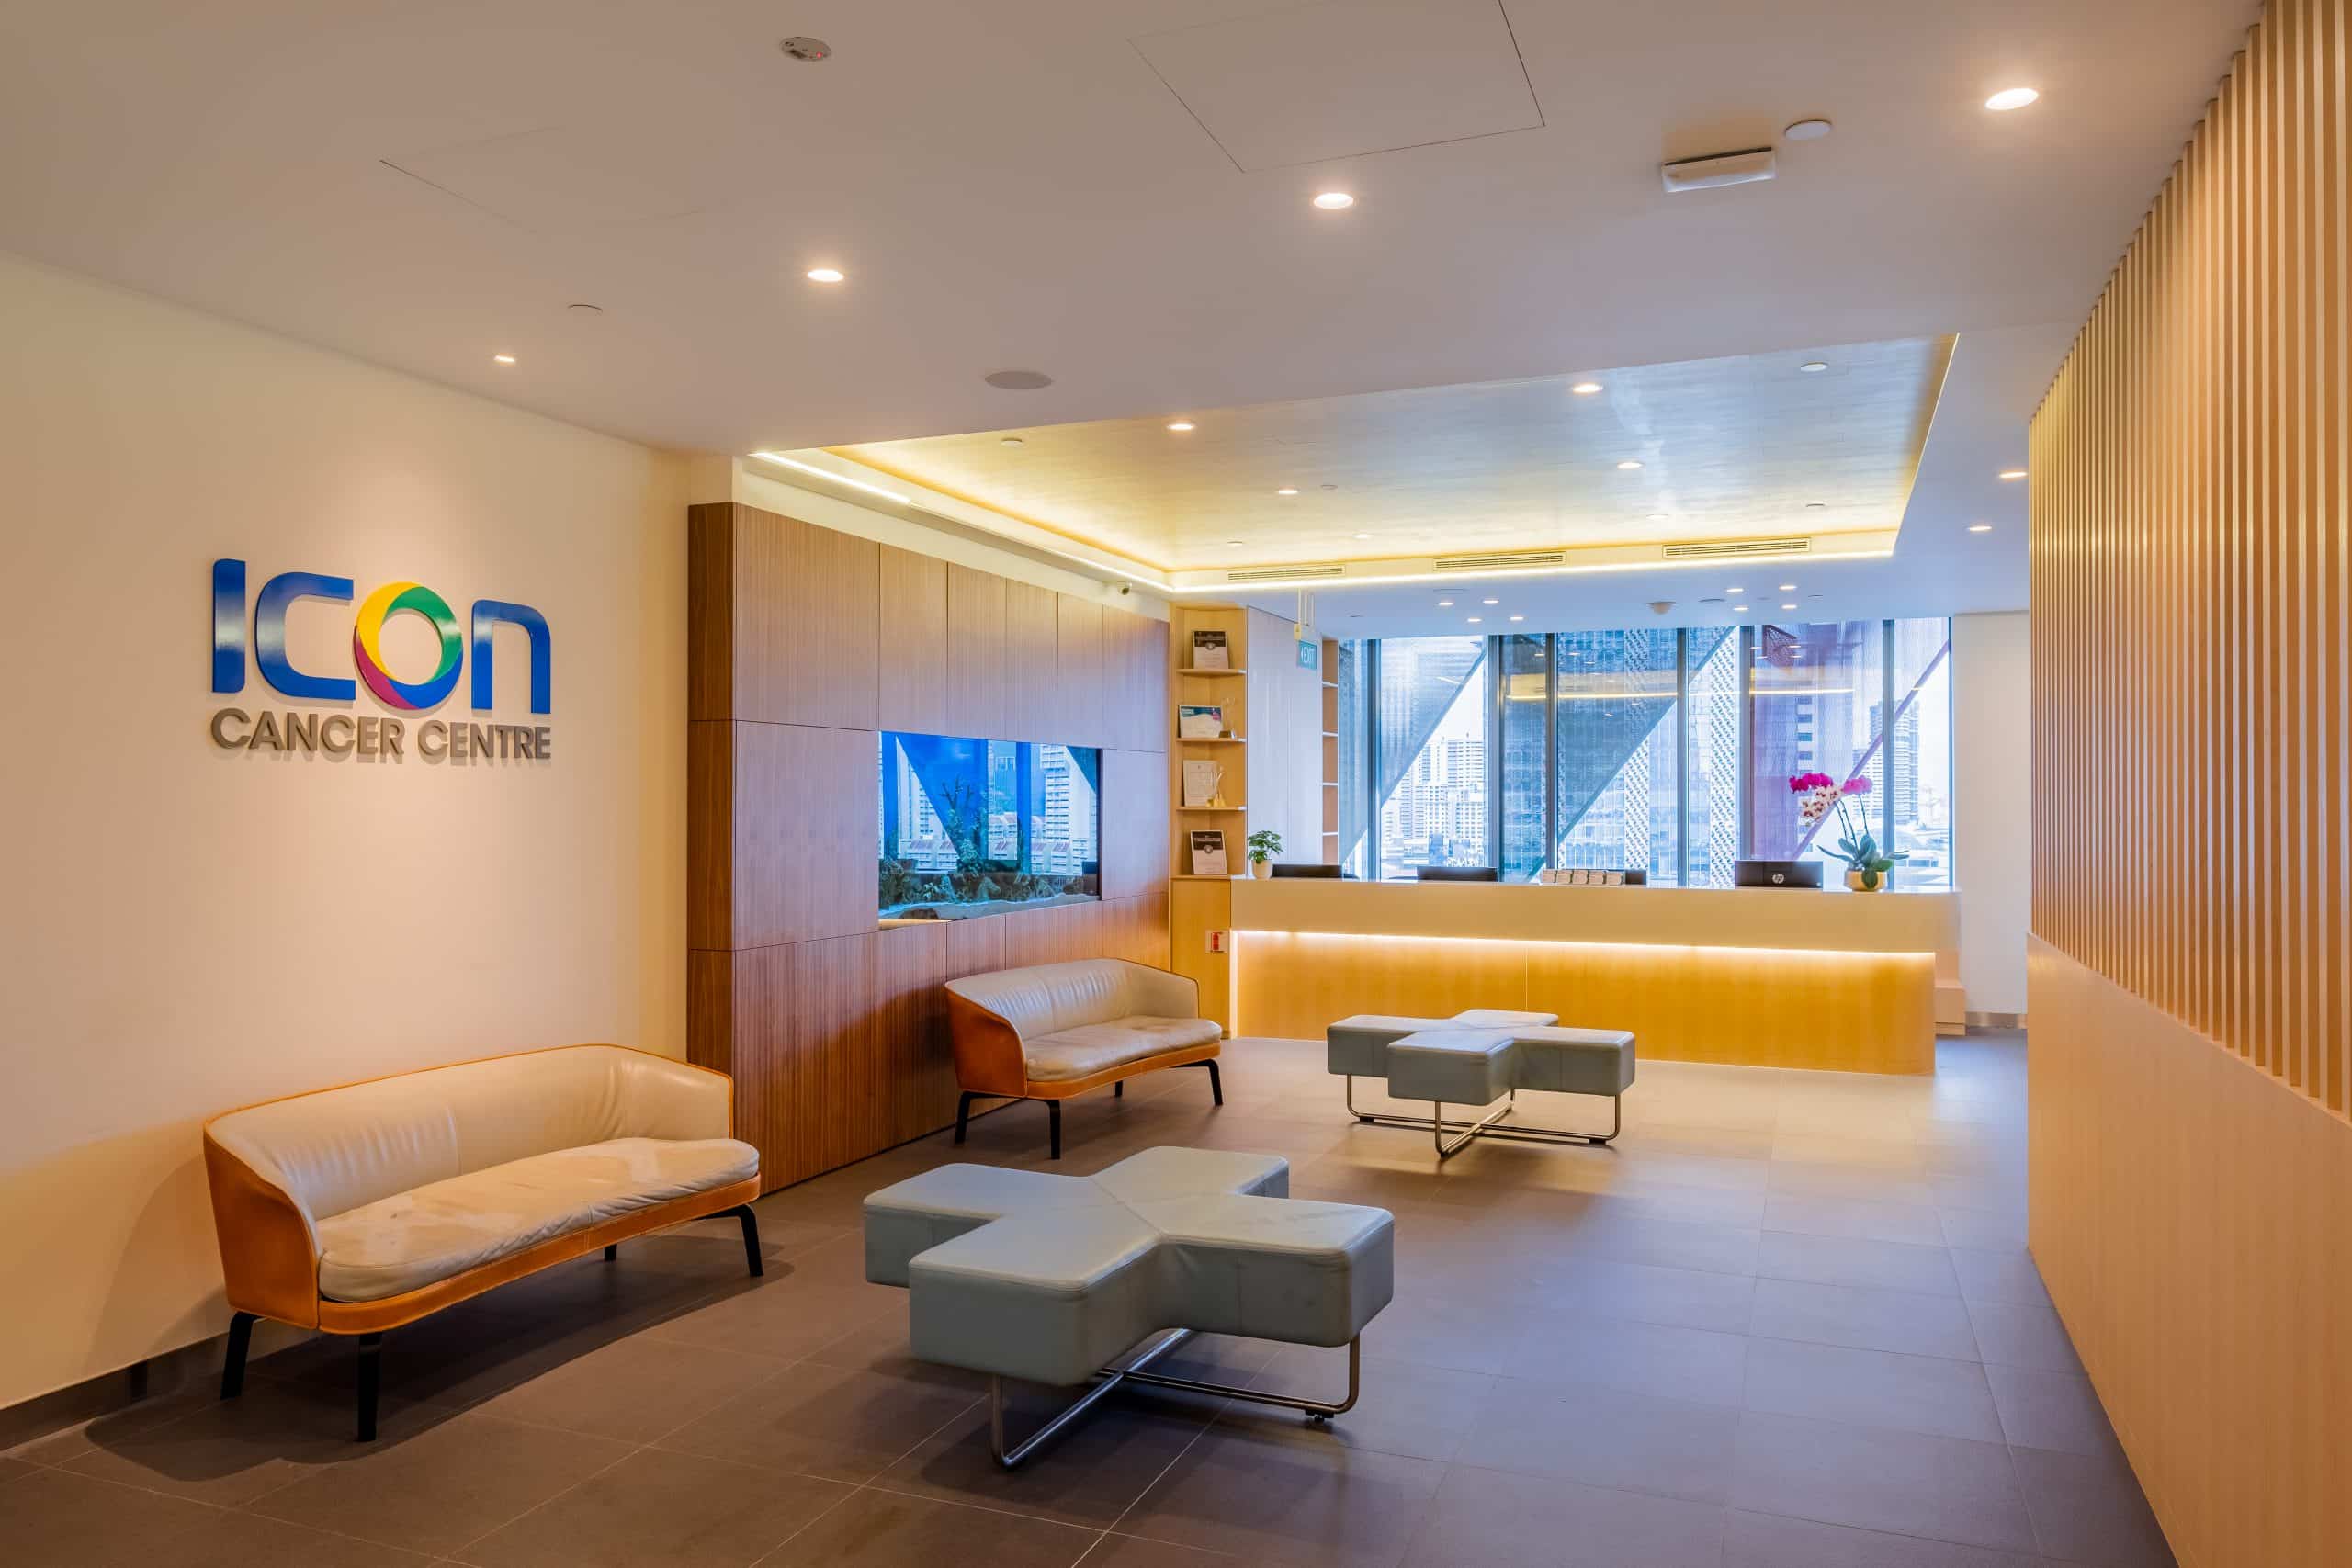 Icon Cancer Centre Farrer Park reception and waiting area